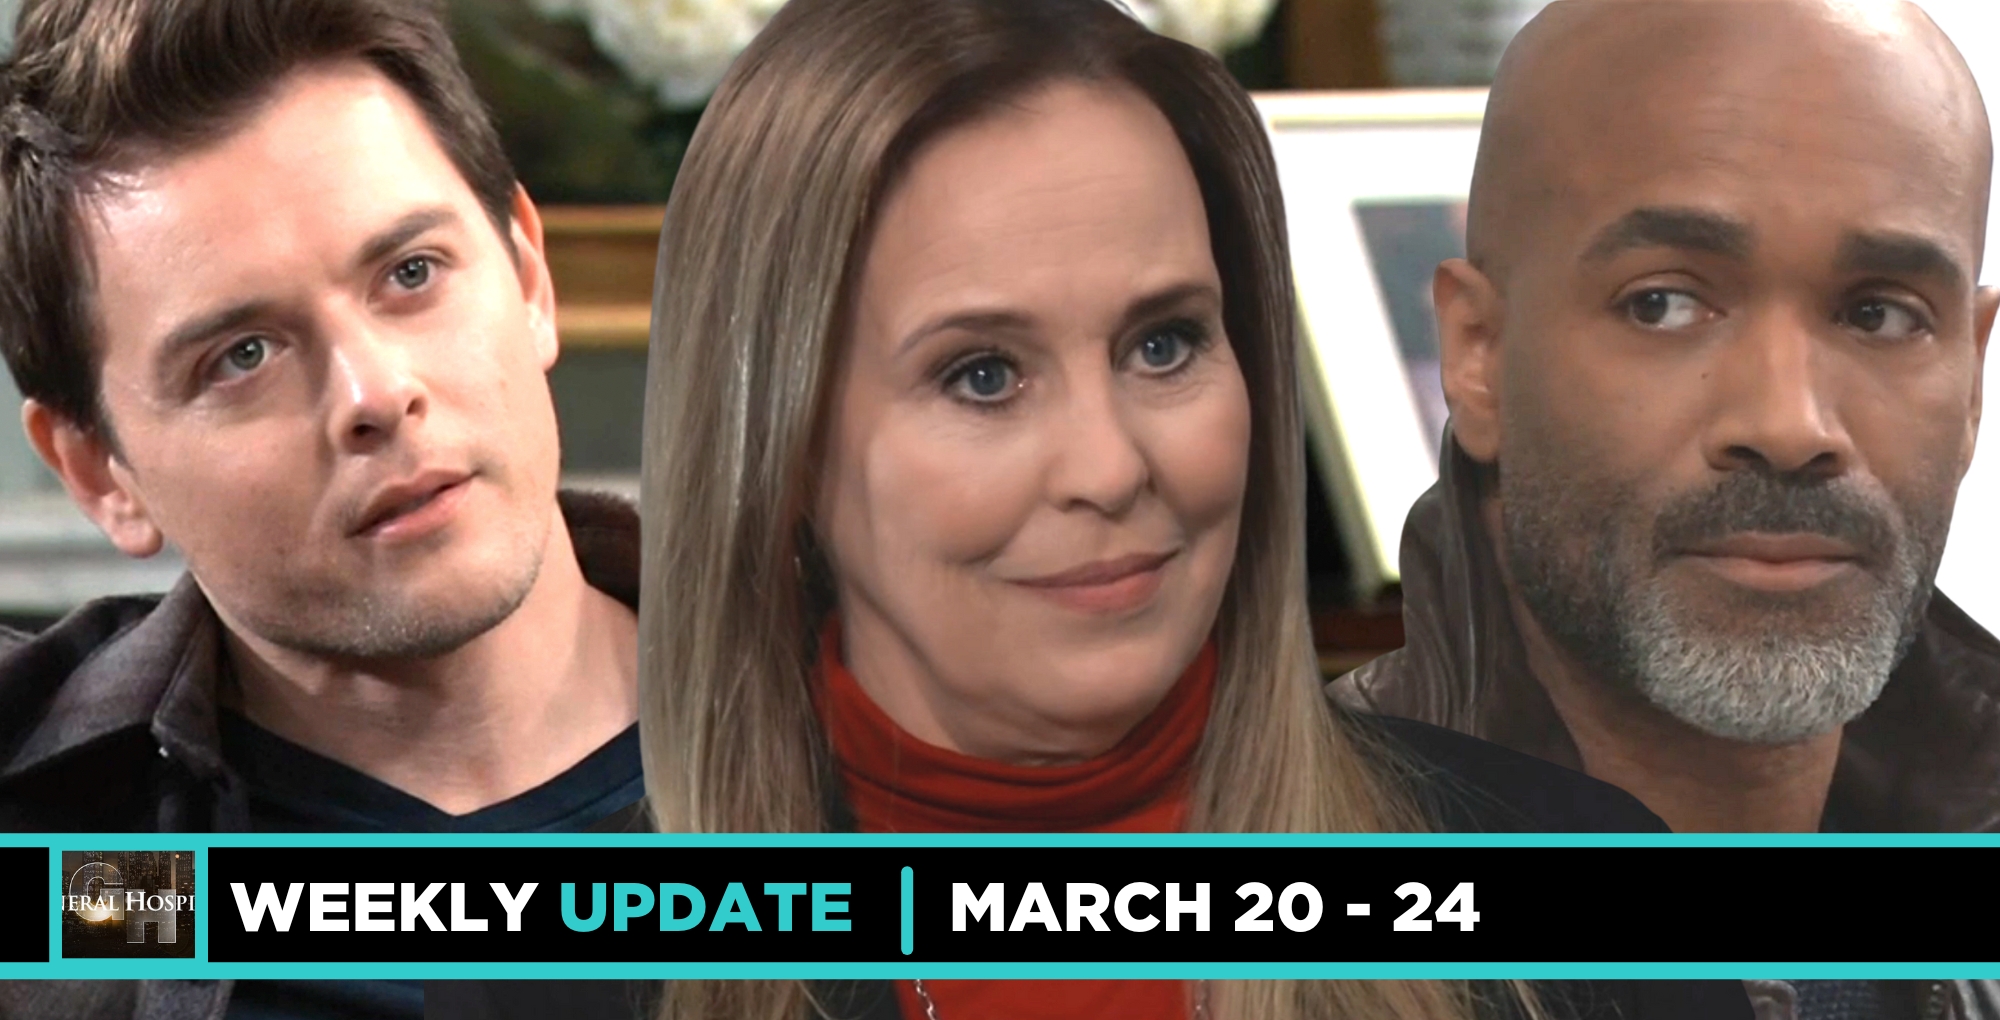 general hospital spoilers weekly update features michael, laura, and curtis.